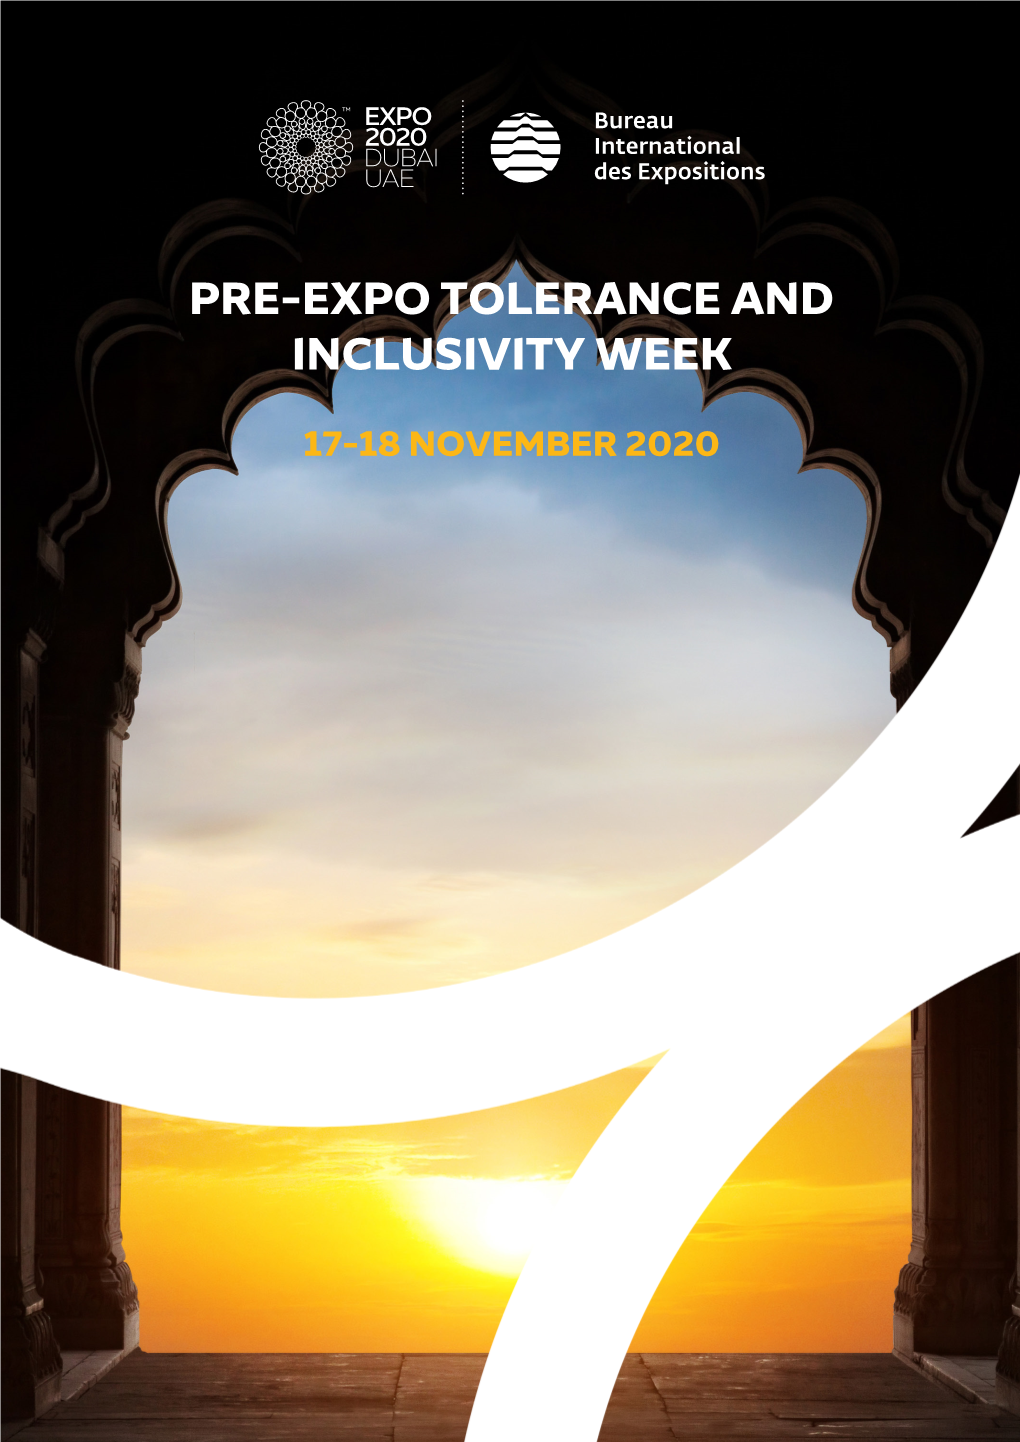 Pre-Expo Tolerance and Inclusivity Week